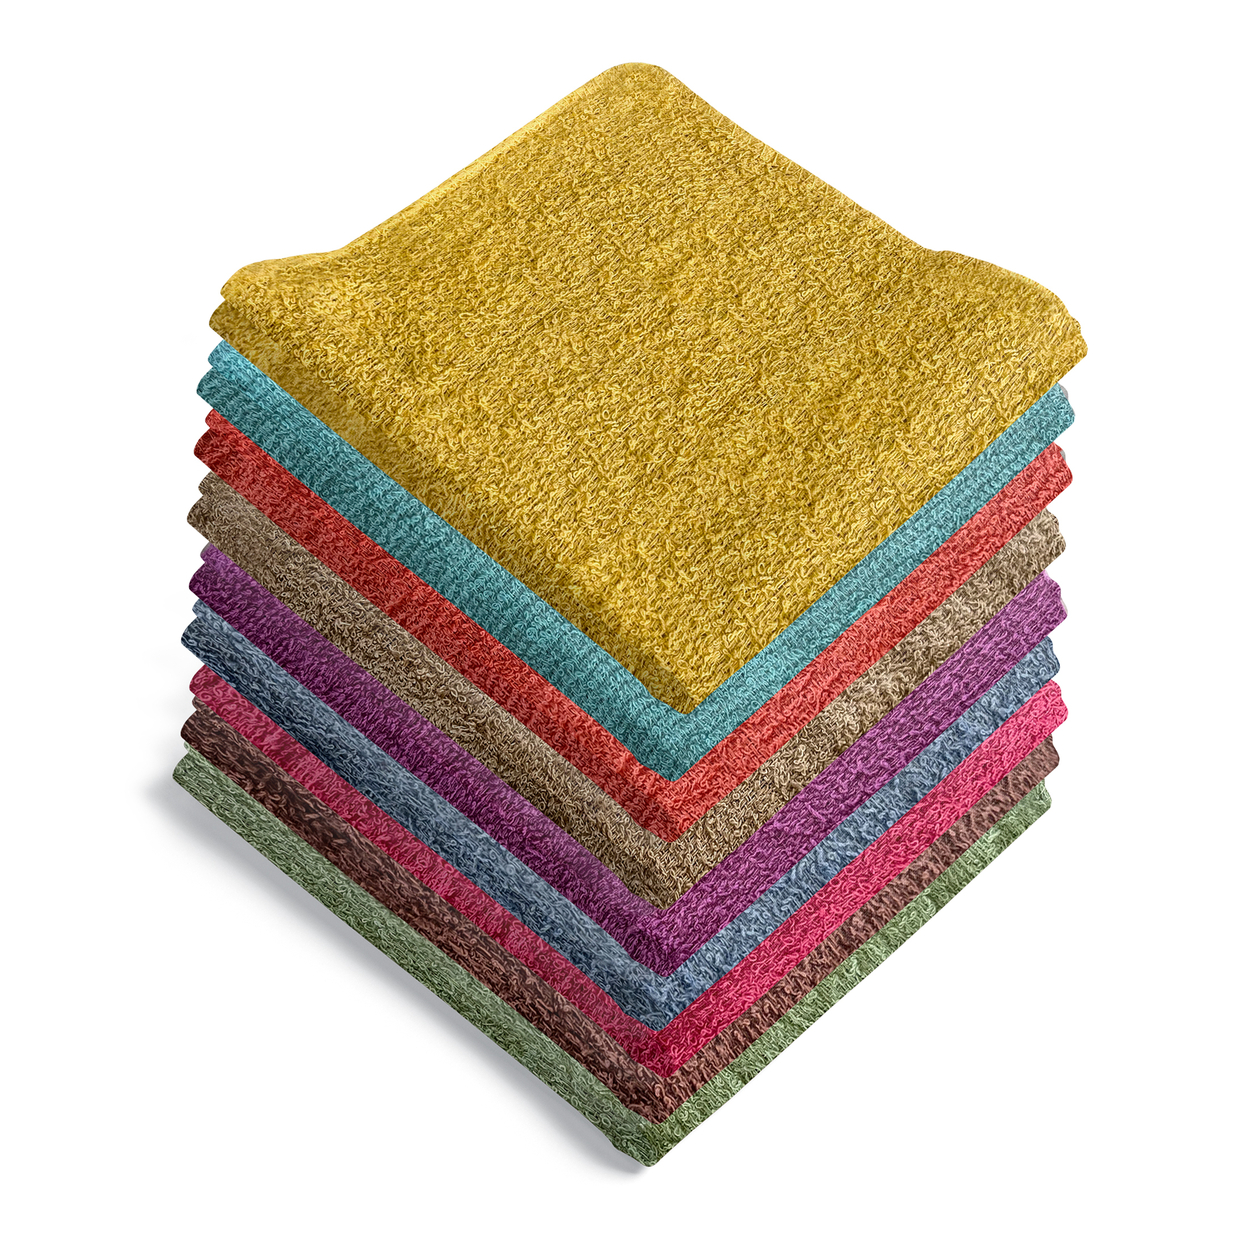 3-Pack: 100% Ultra-Soft Absorbent Cotton Multipurpose Cleaning Wash Cloths - Yellow